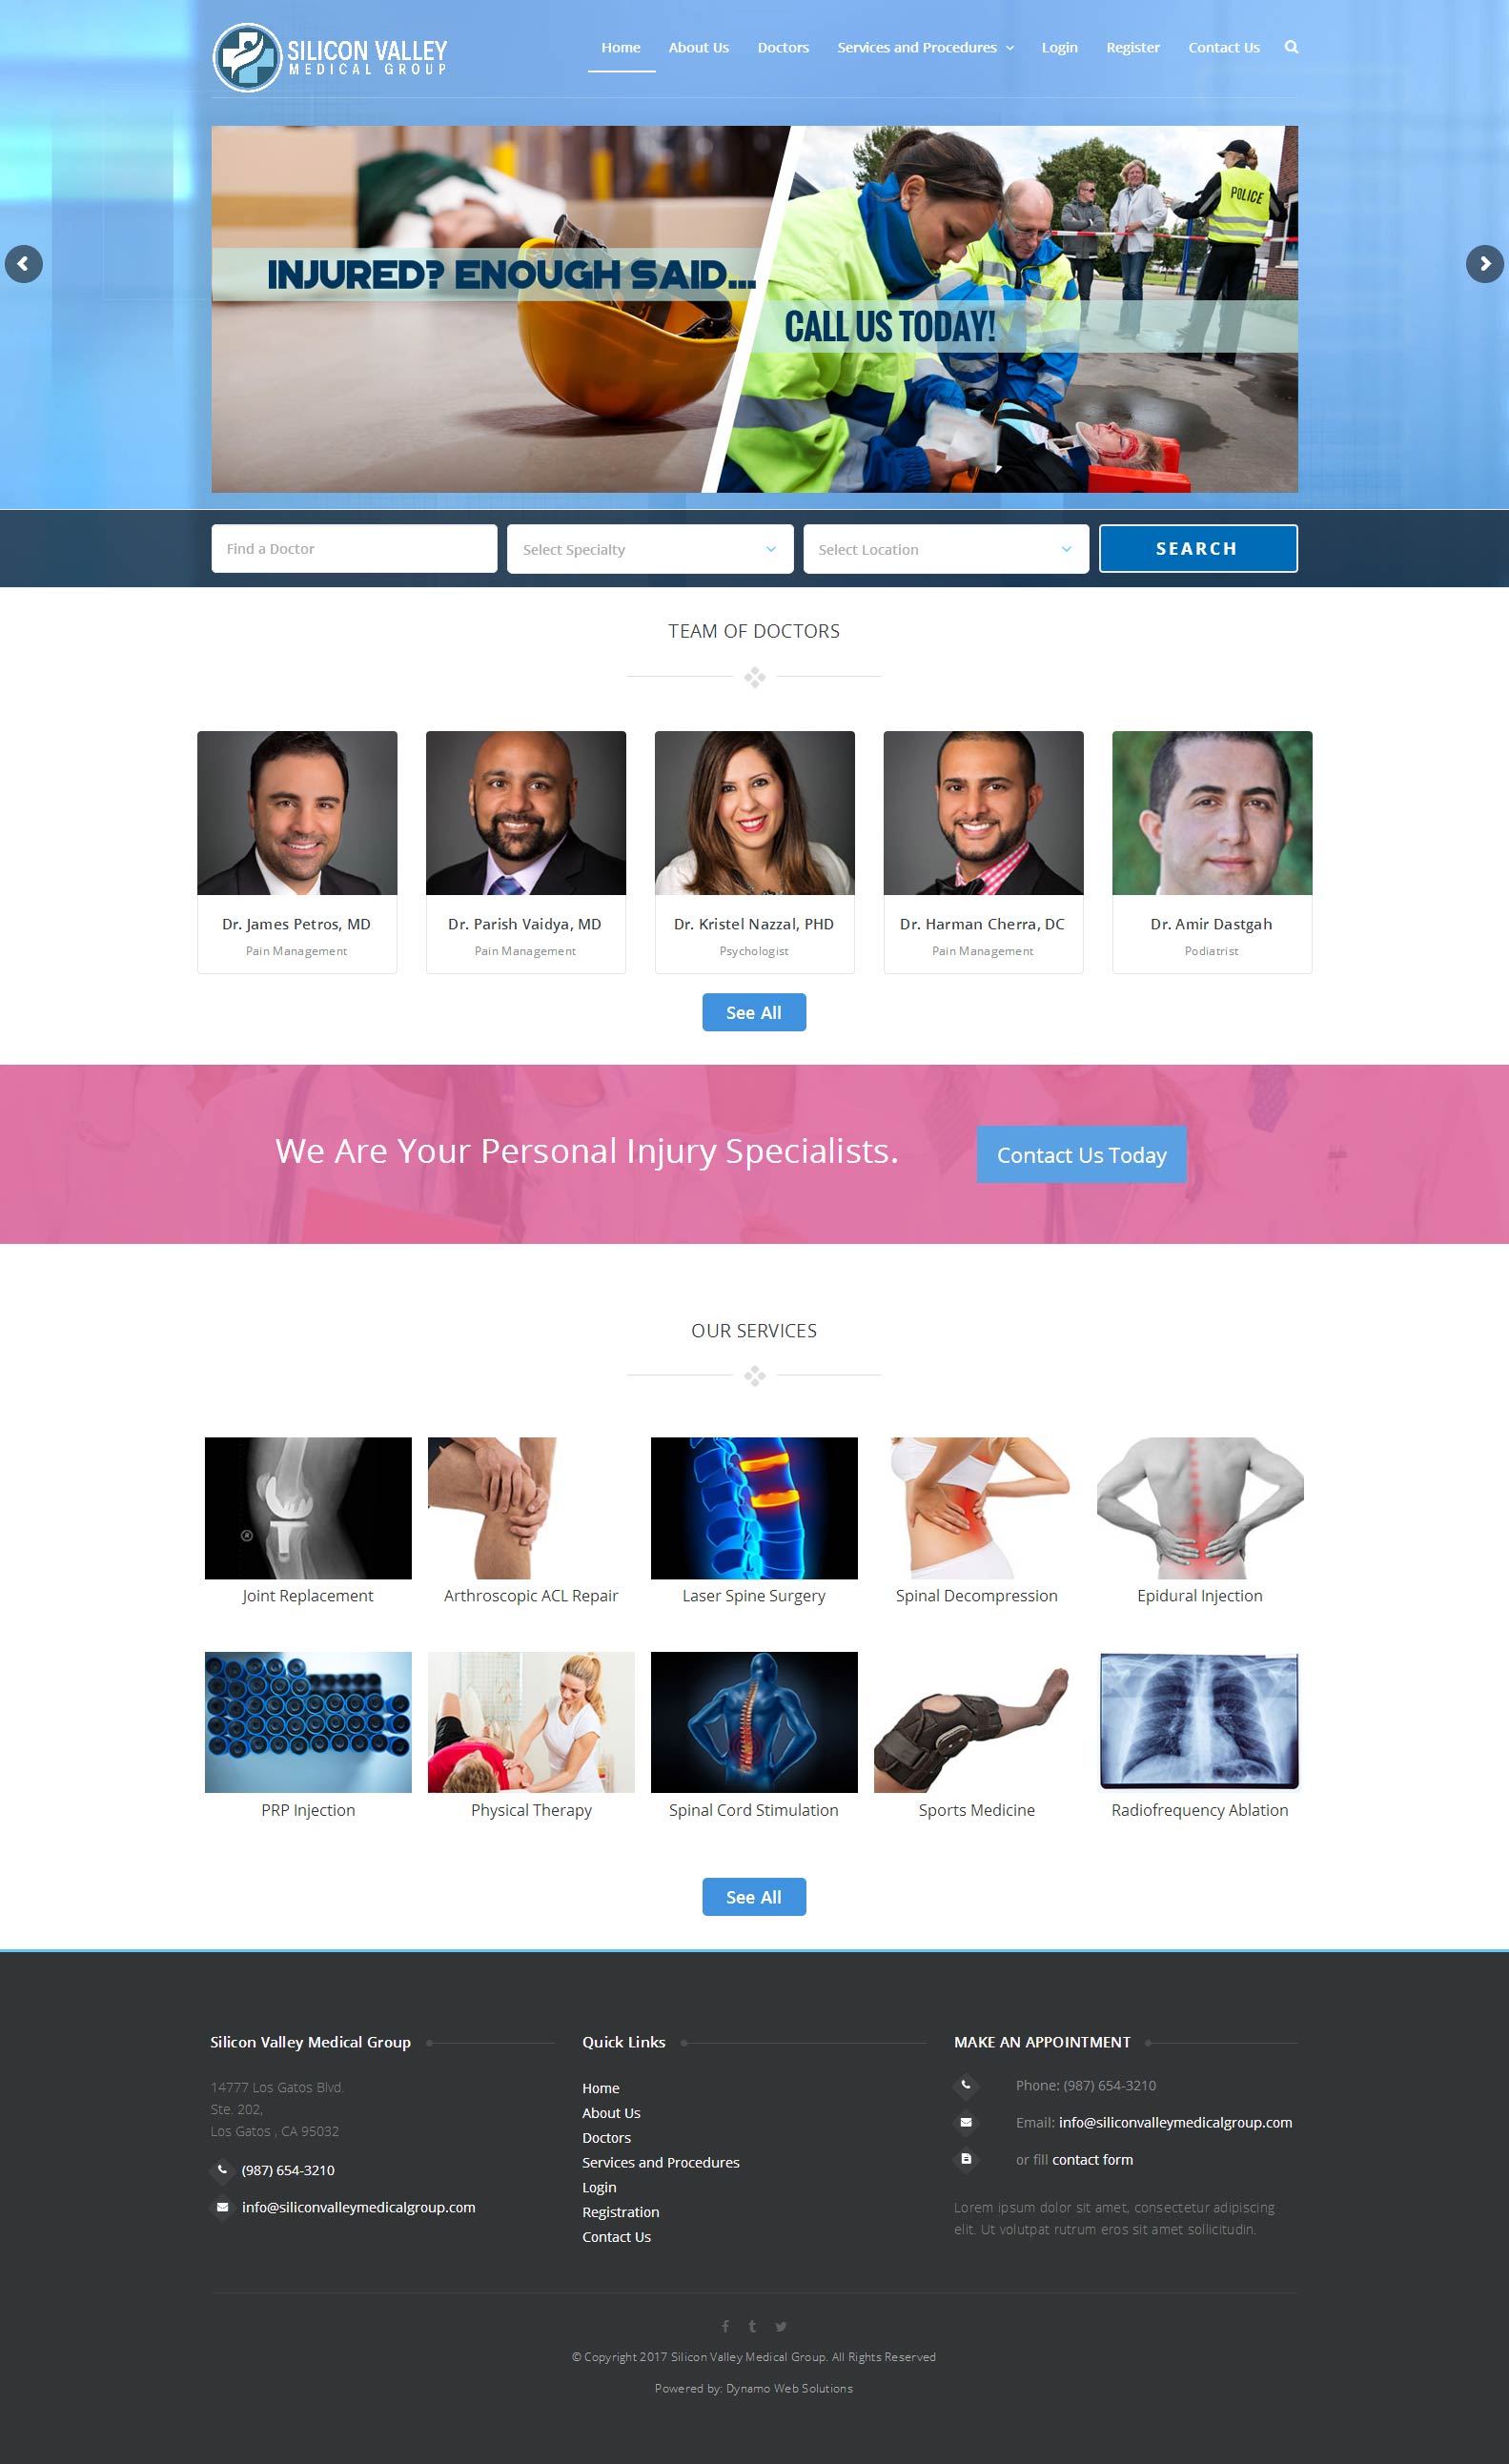 siliconvalleymedicalgroup - Silicon Valley Medical Group